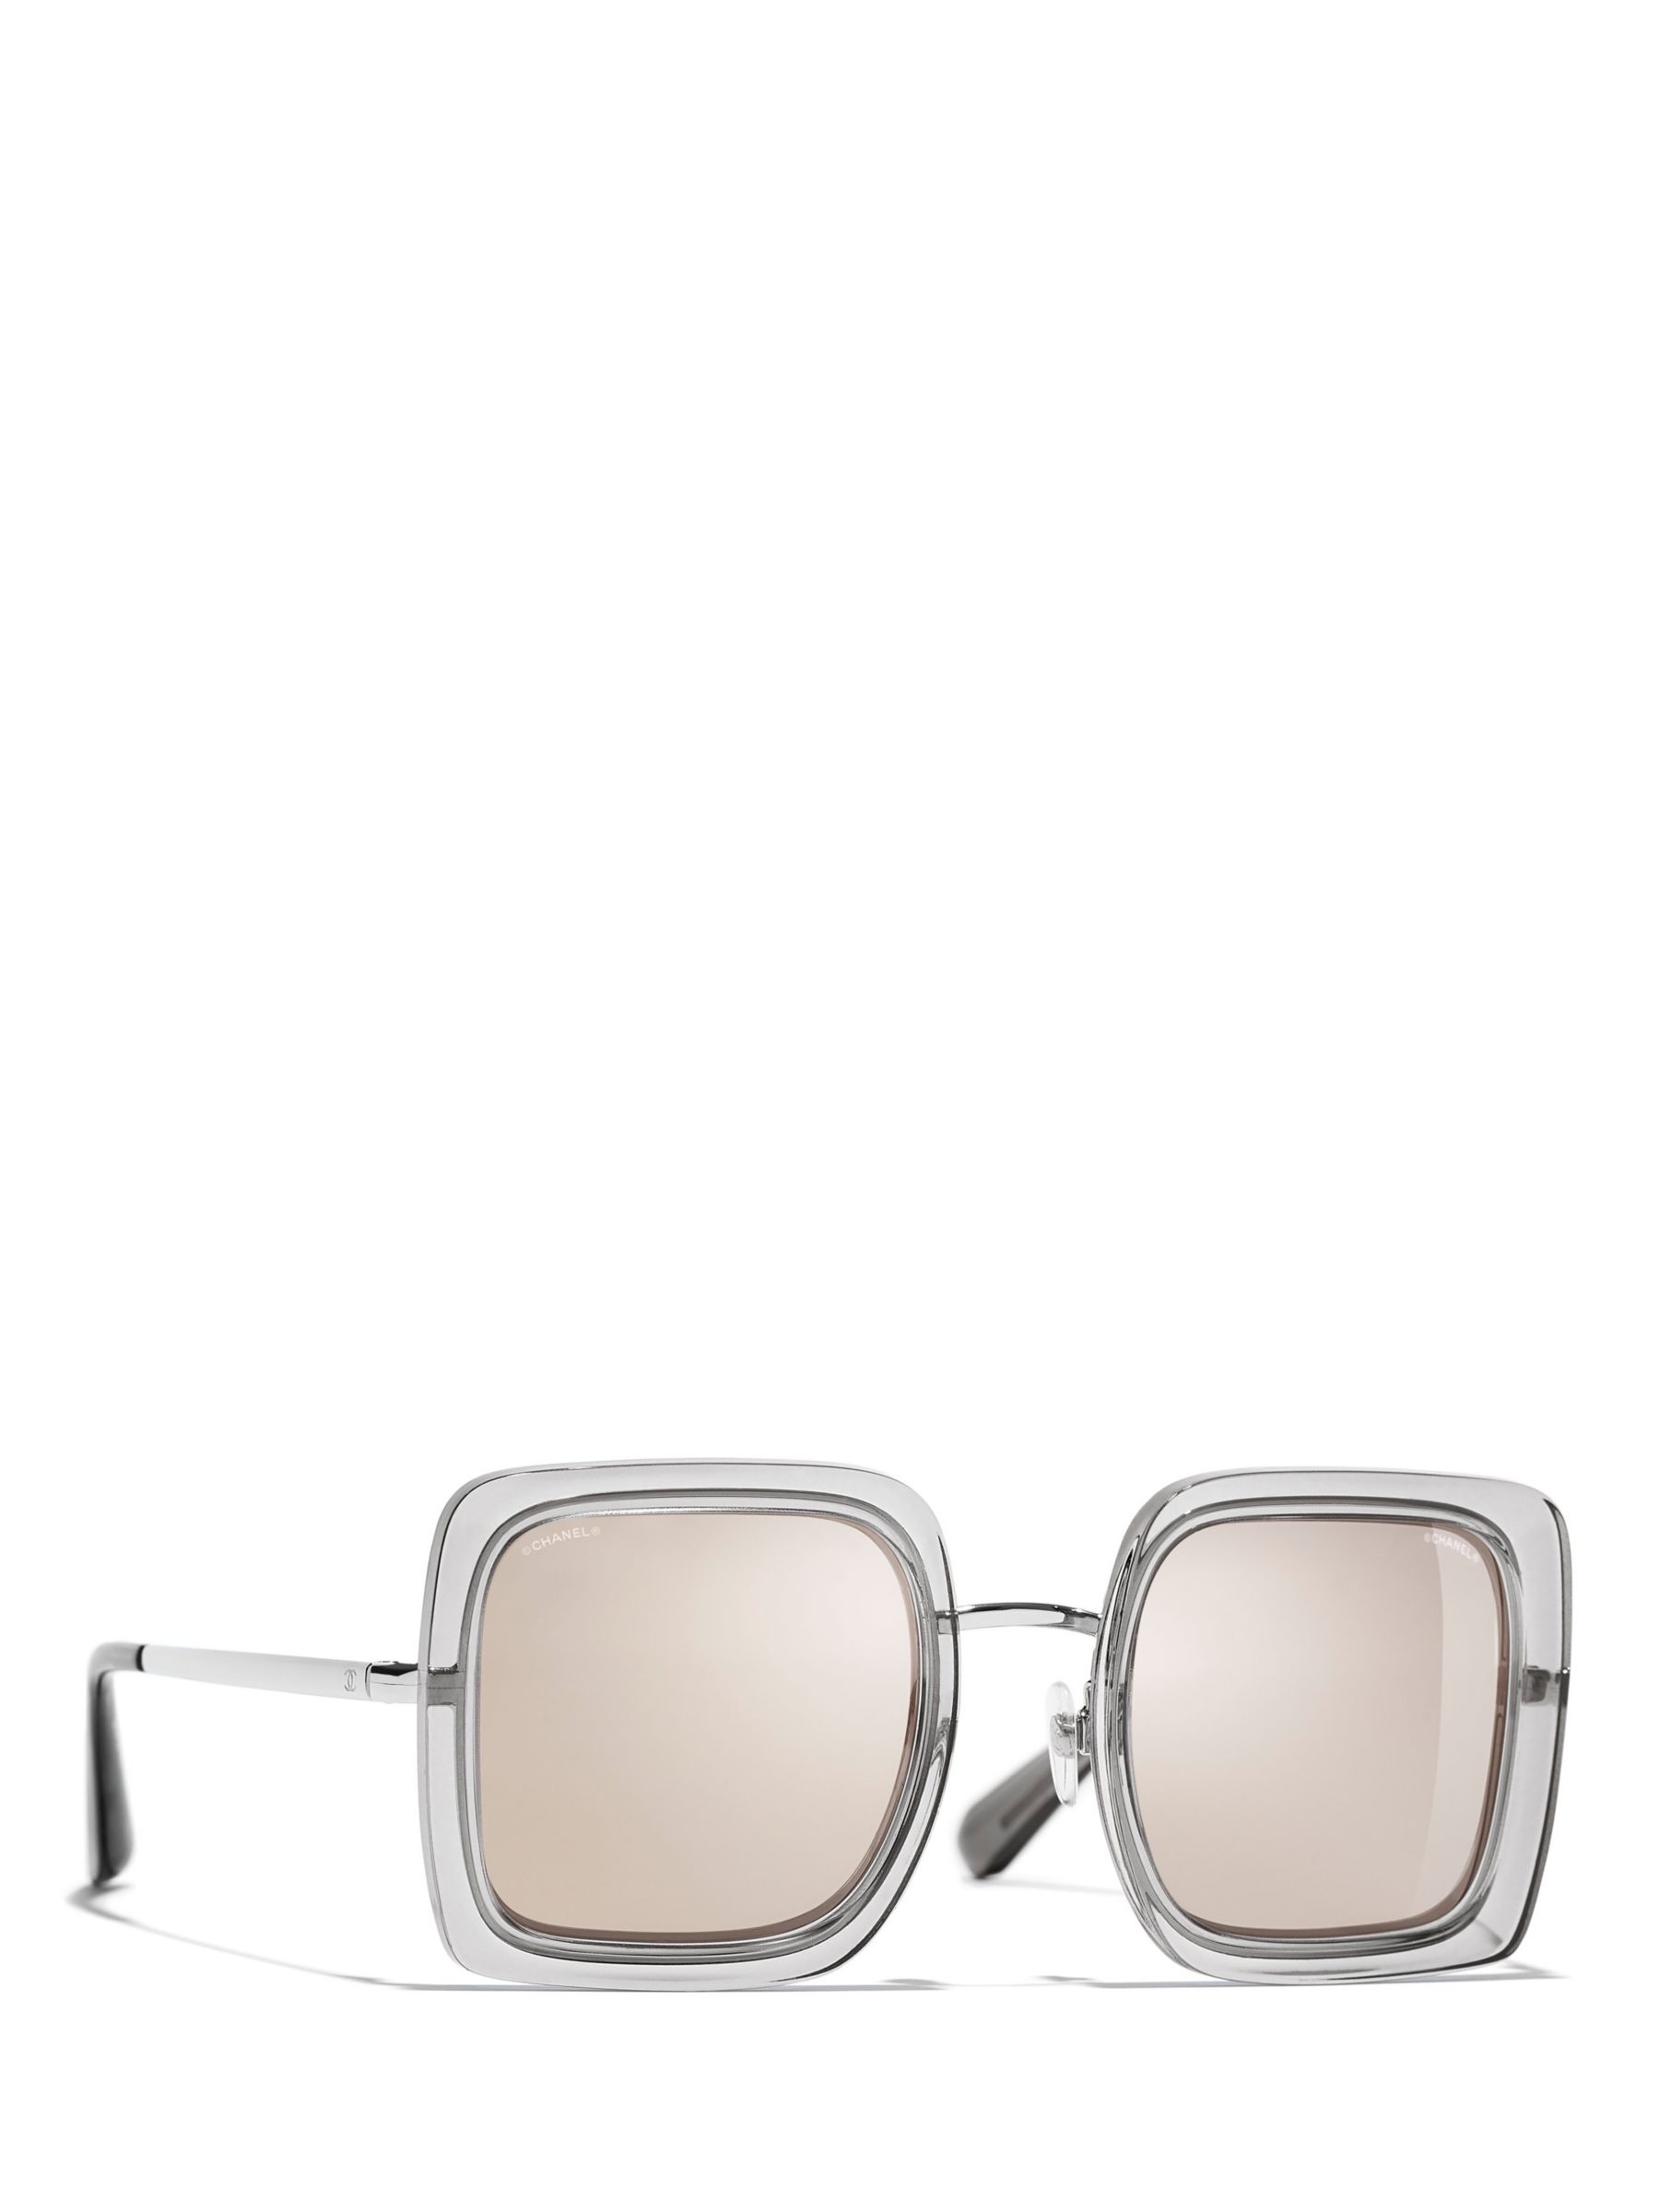 CHANEL Square Sunglasses Grey/Mirror Clear at Lewis & Partners